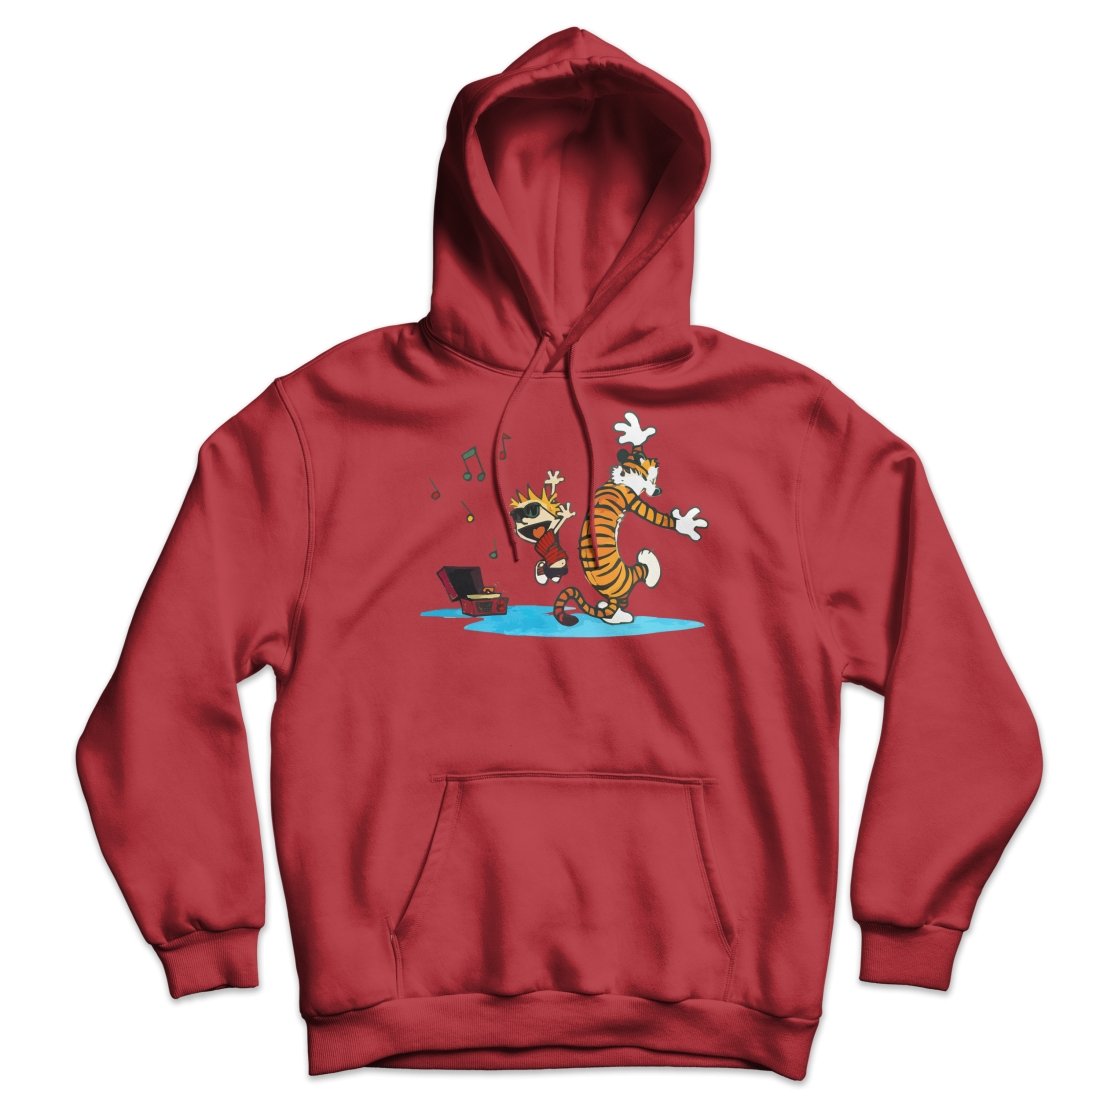 Hoodie Calvin and Hobbes Dancing with Record Player Unisex Hoodie Pullover - KME means the very best